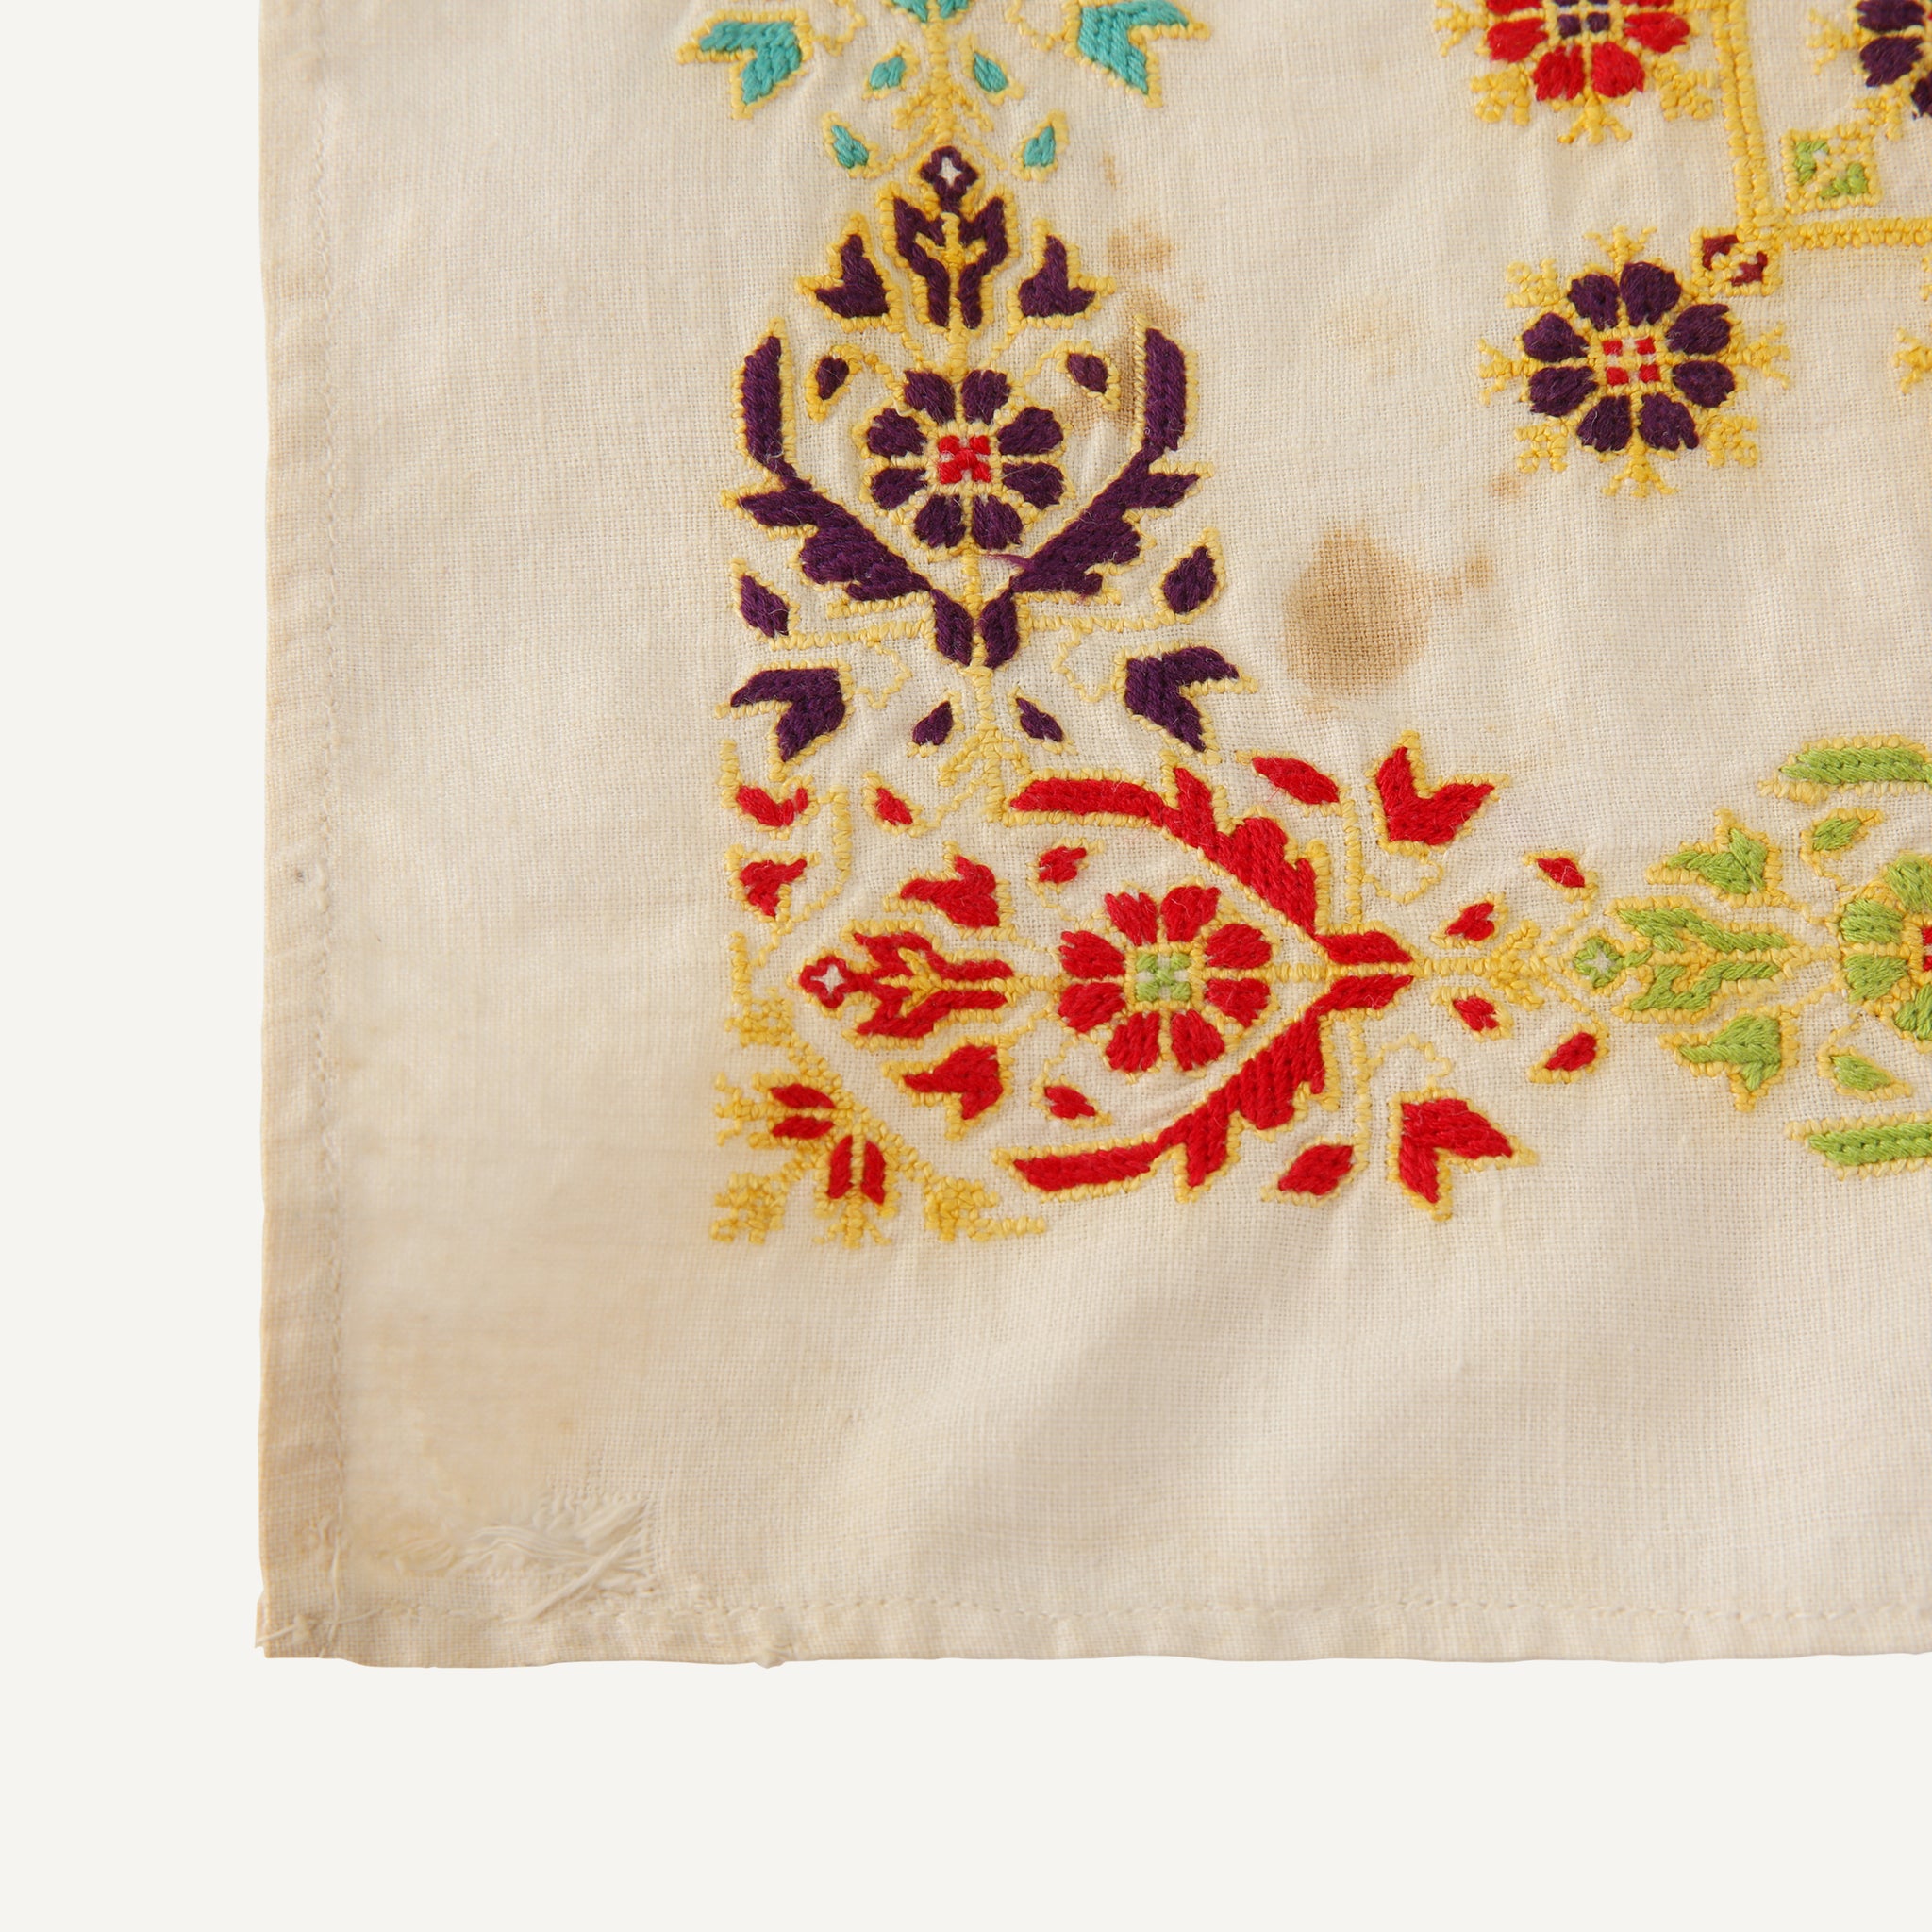 ANTIQUE EMBROIDERED TEXTILE